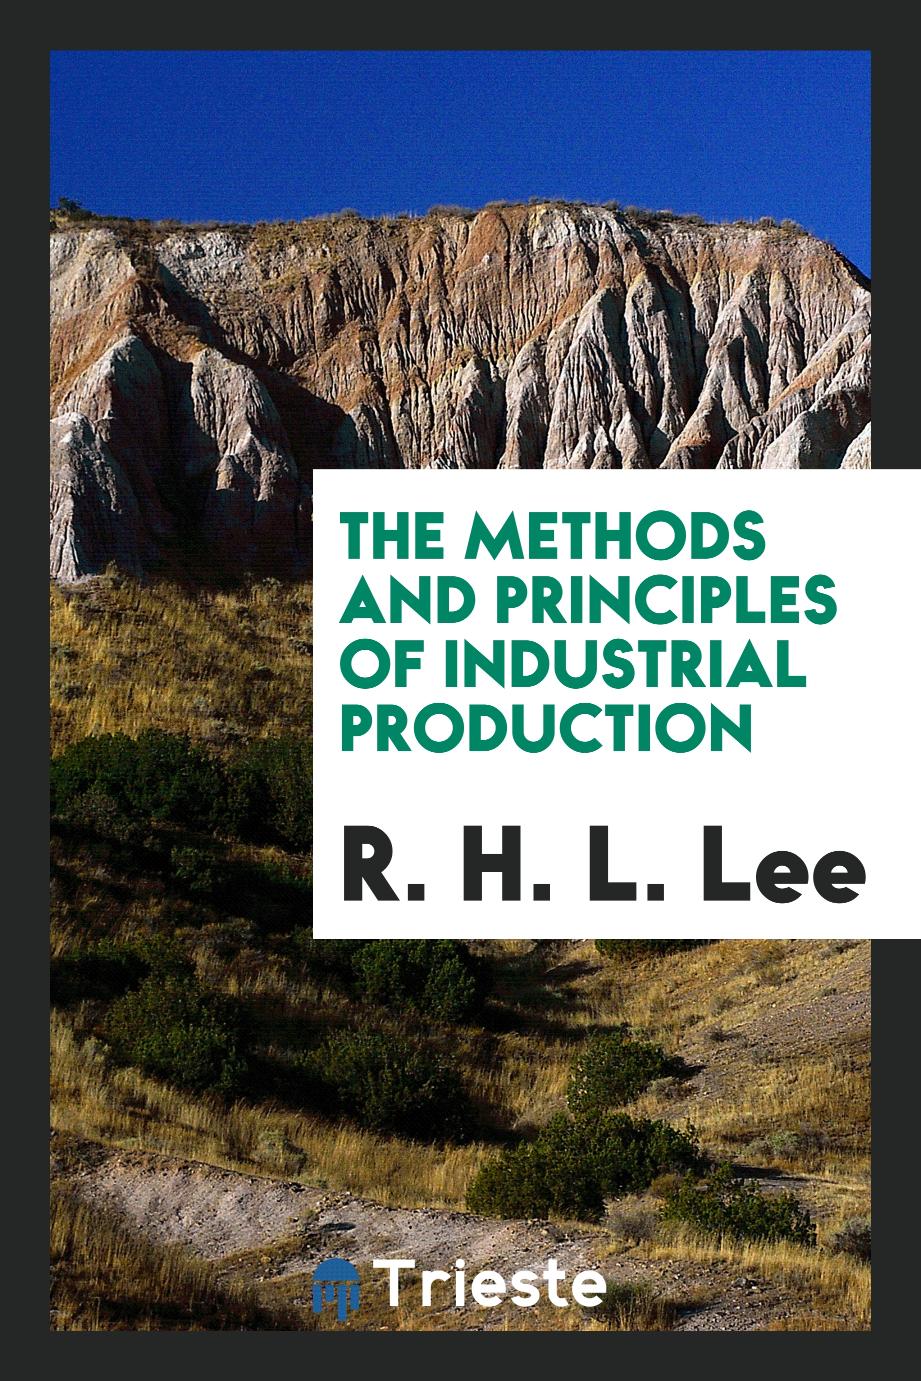 The methods and principles of industrial production